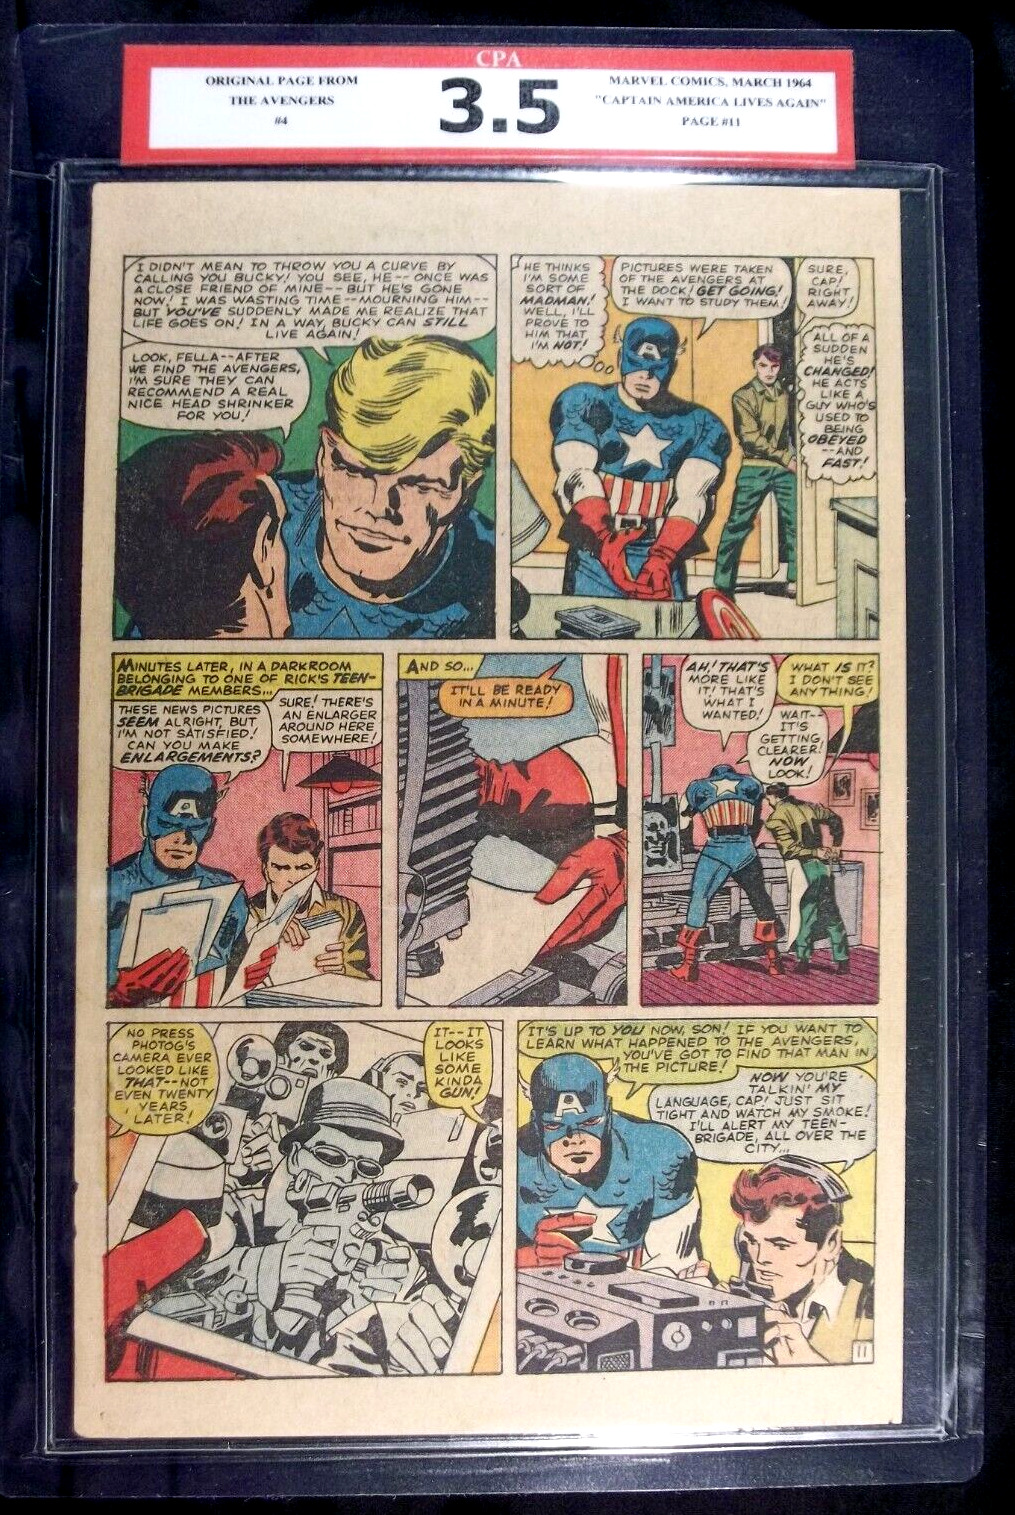 The Avengers #4 CPA 3.5 SINGLE PAGE #11 1st Silver Age App. of Captain America